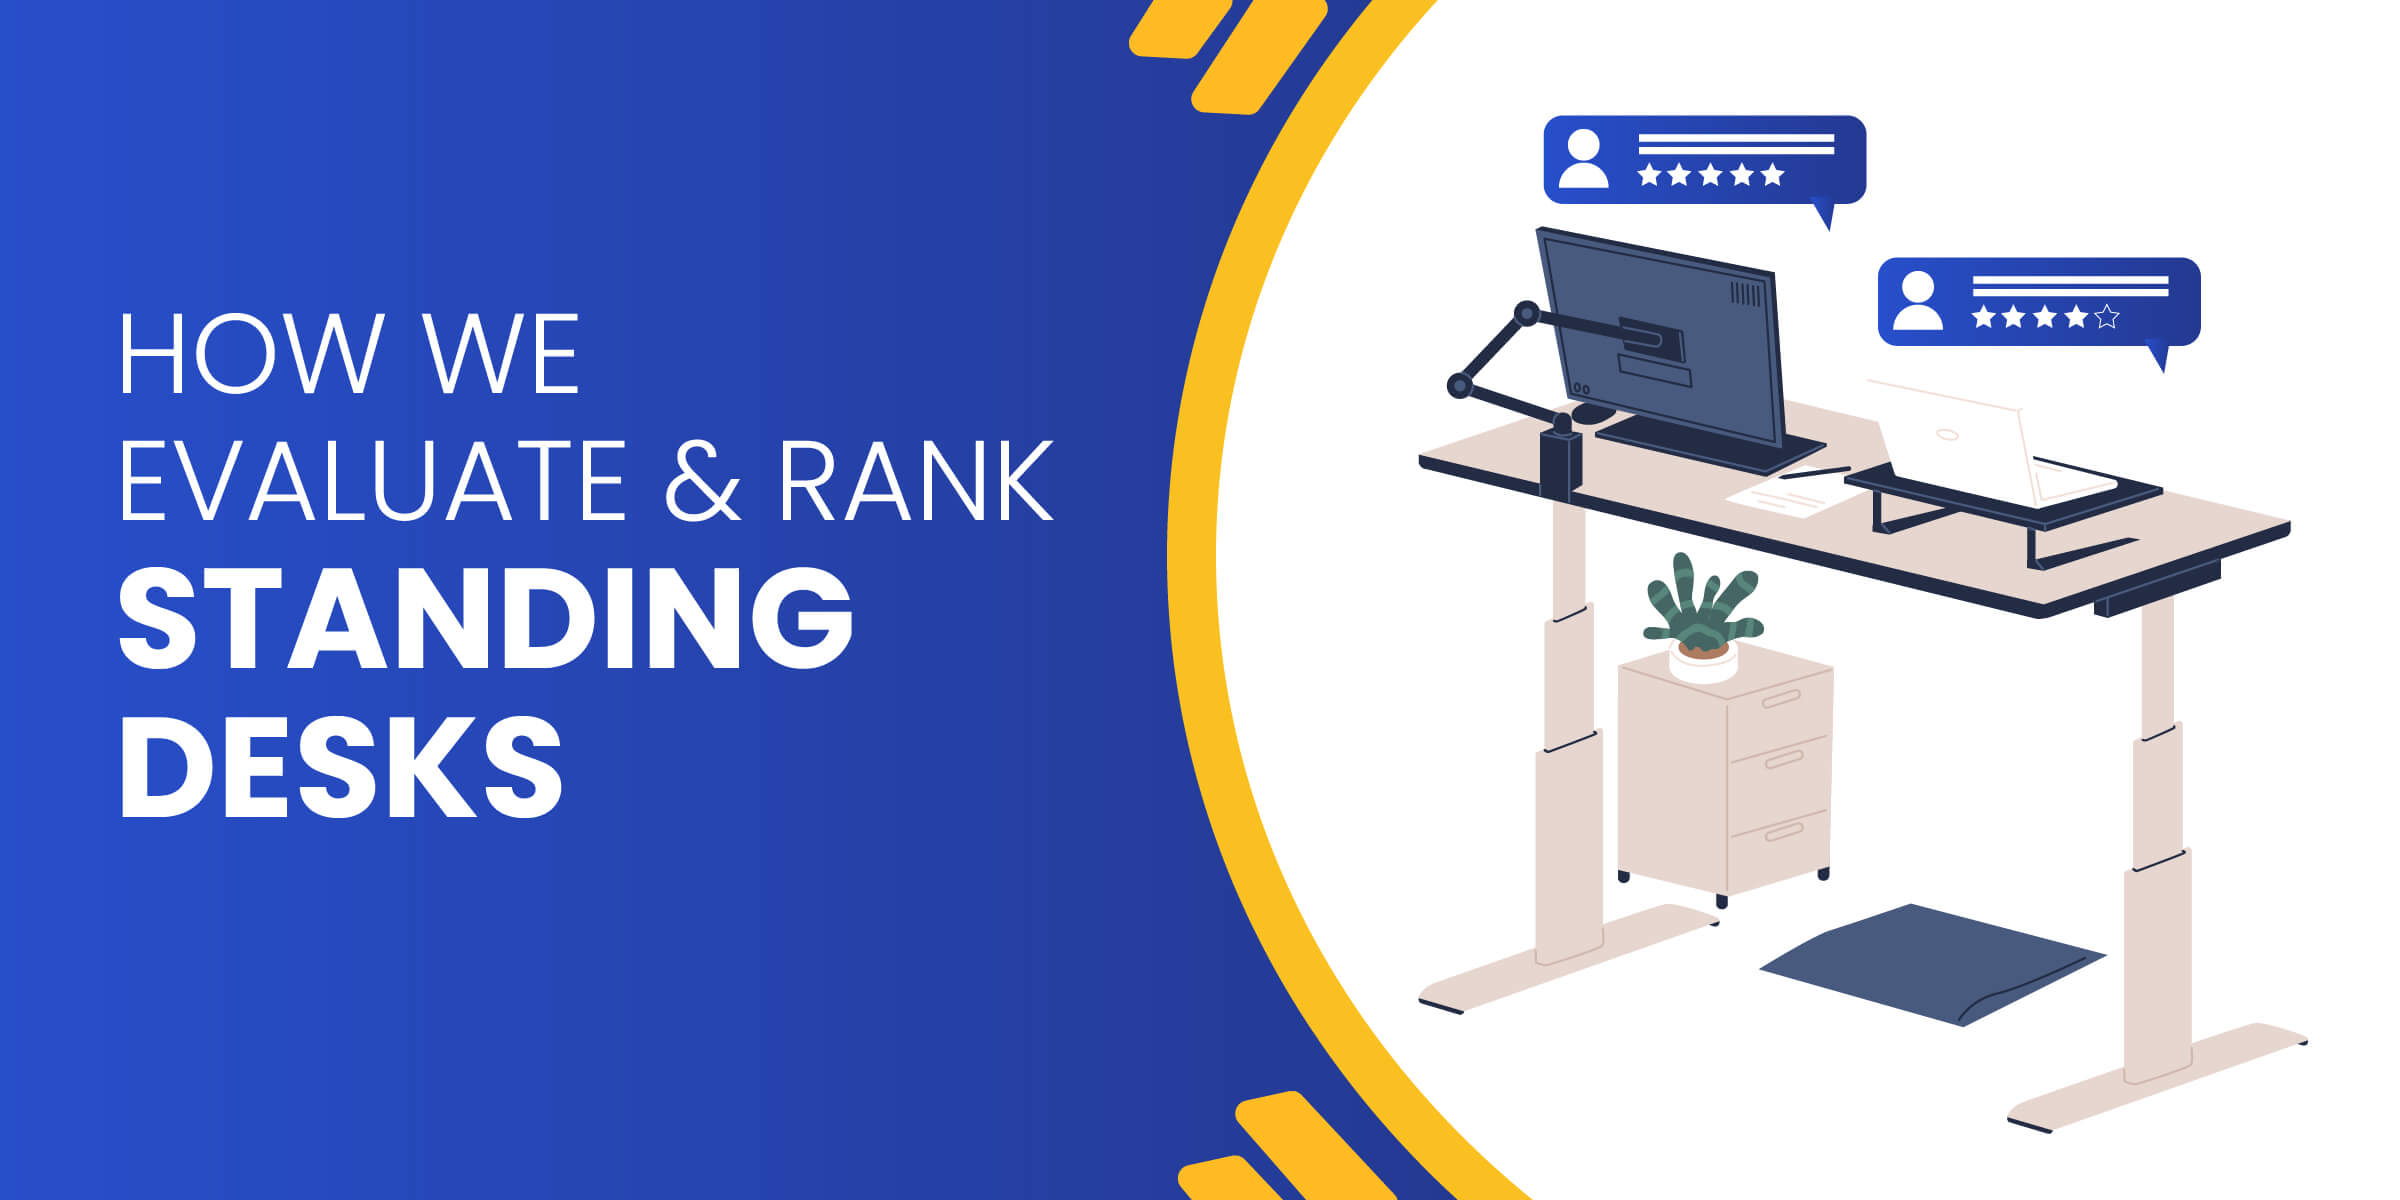 How We Evaluate and Rank Standing Desks